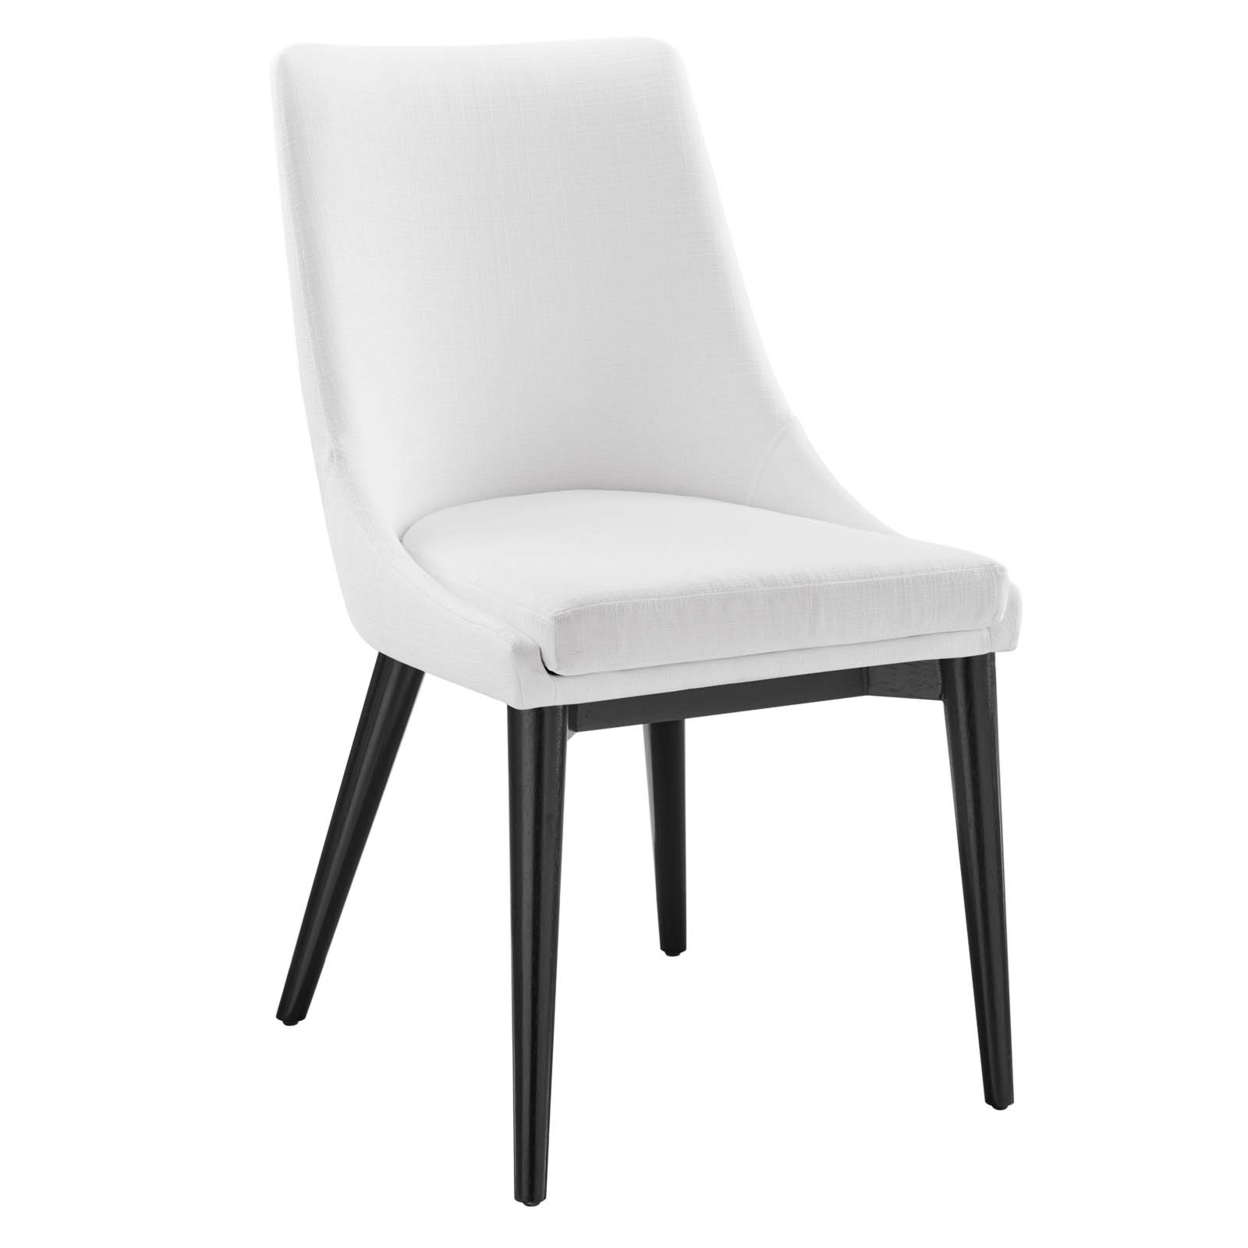 Viscount Fabric Dining Chair, White